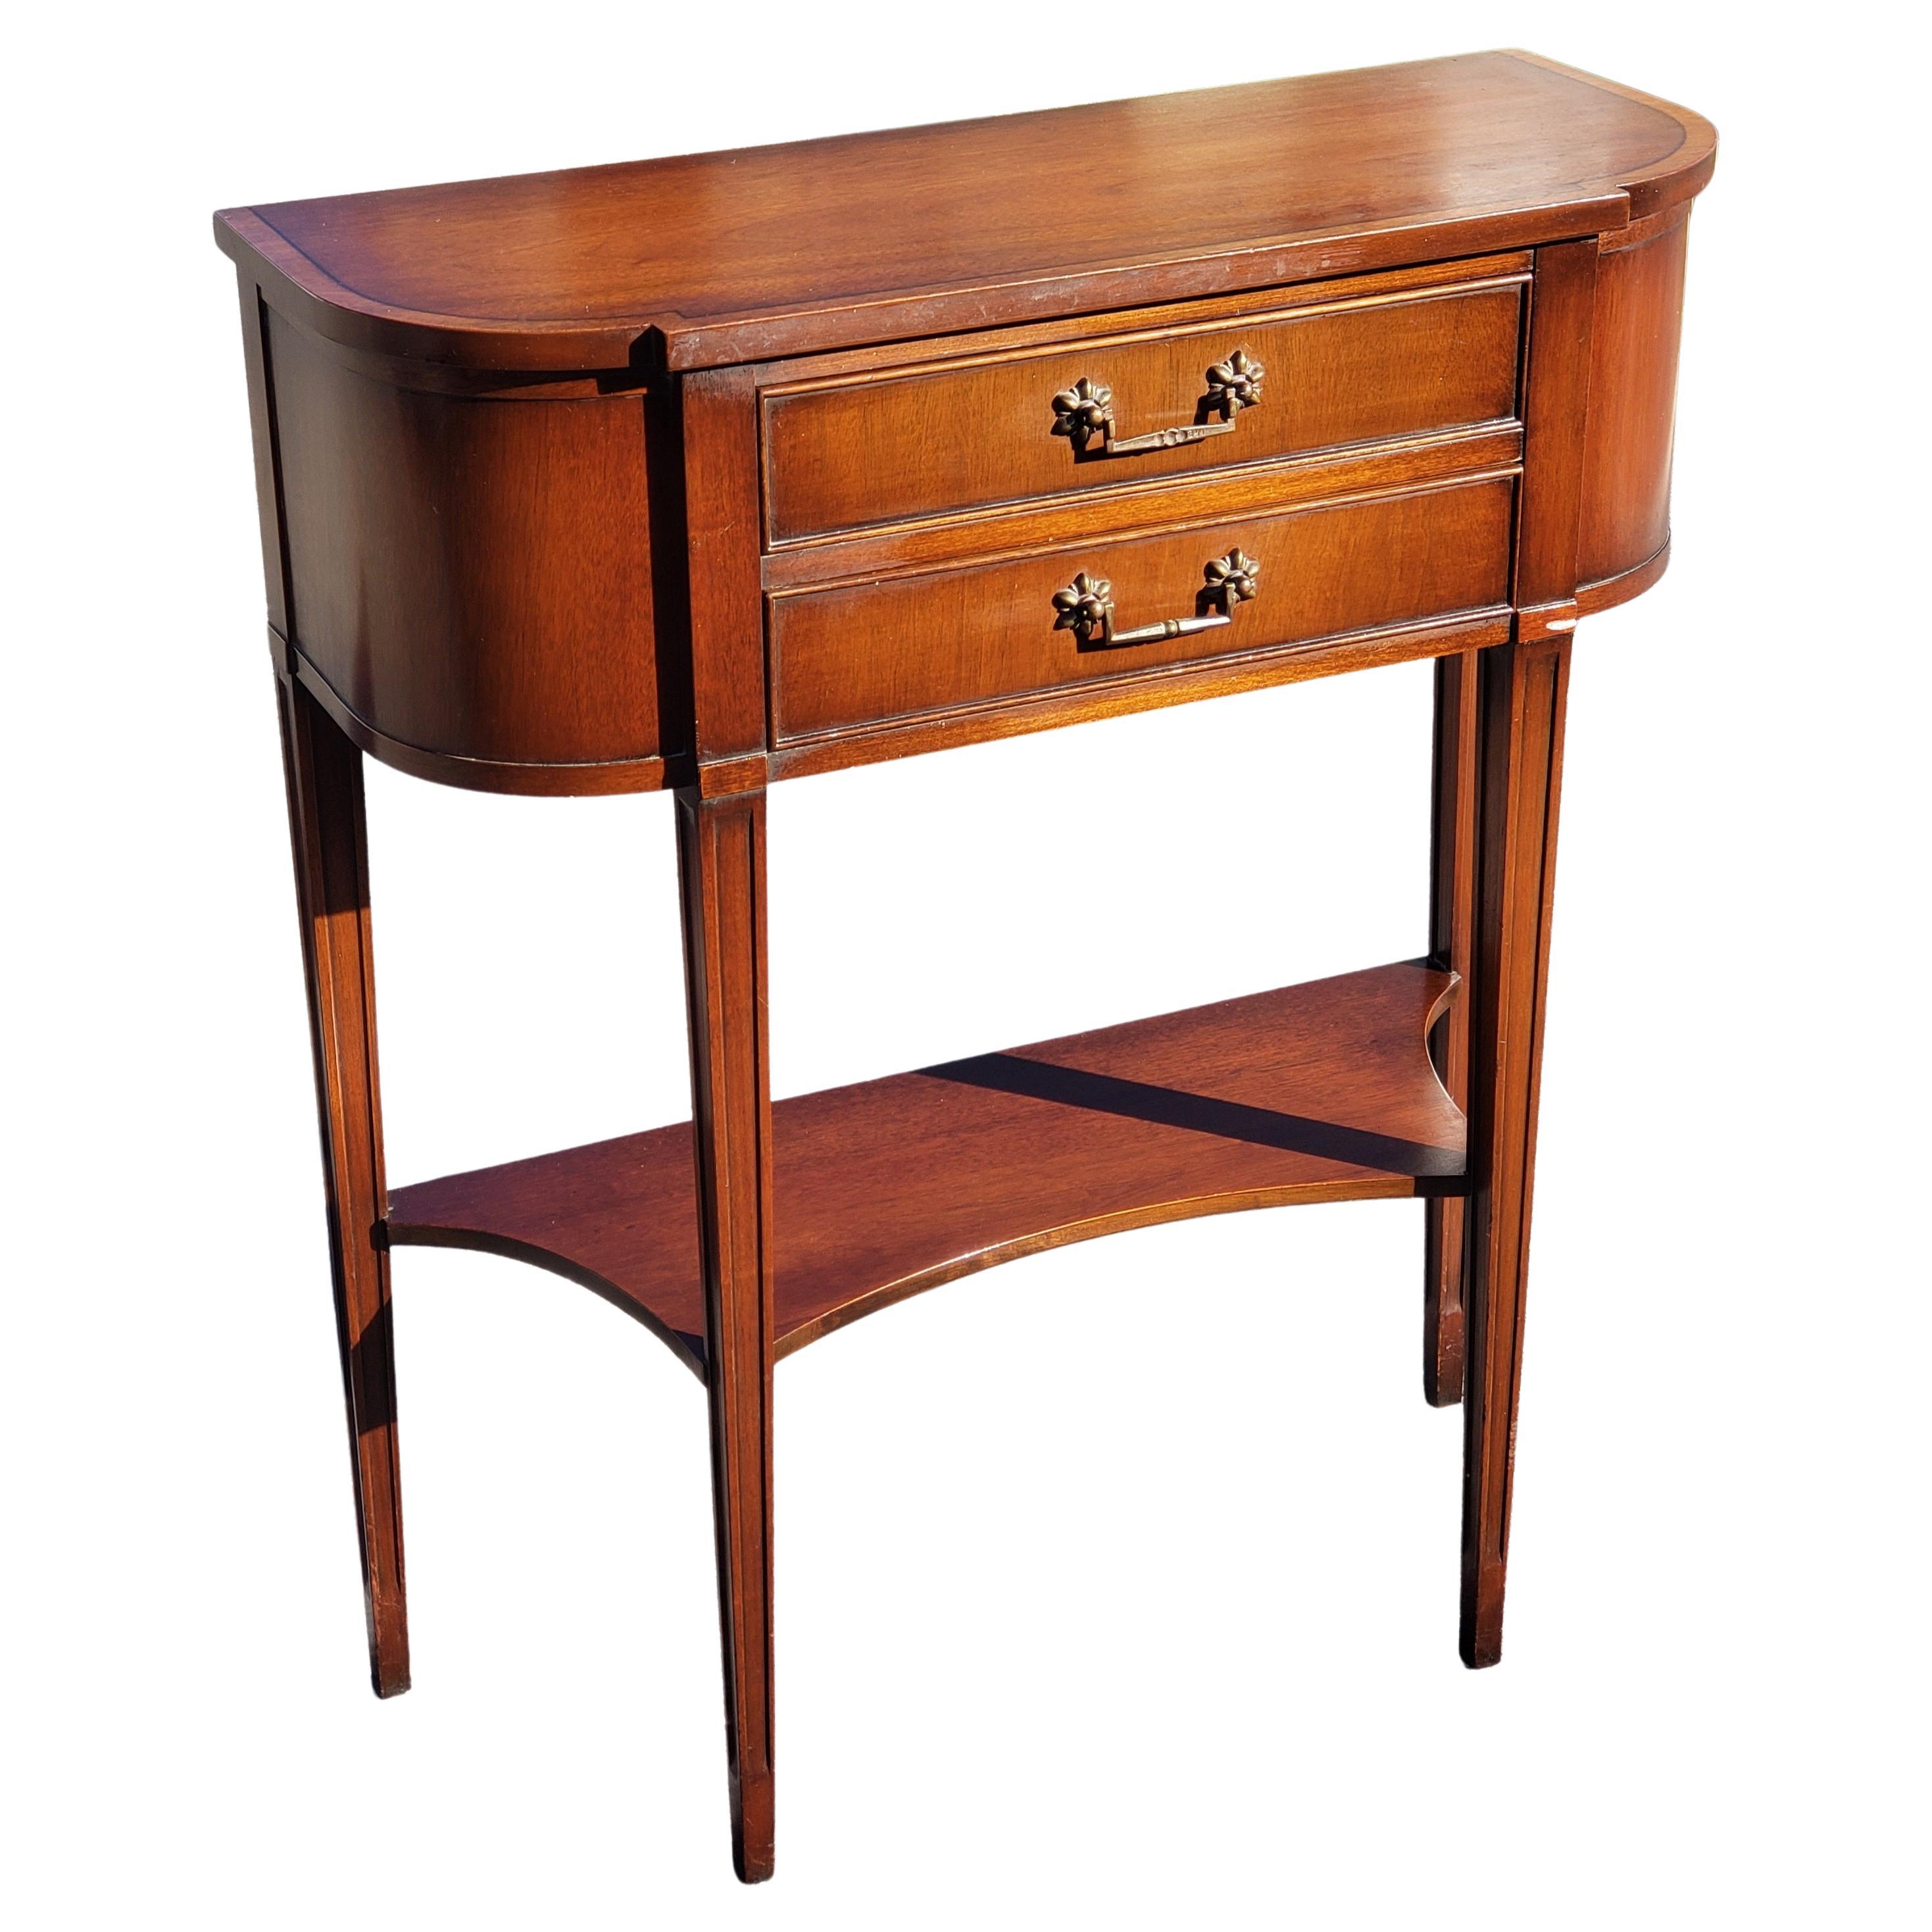 American Pair of Tier 2-Drawer Banded Mahogany Regency Console Tables, Circa 1940s